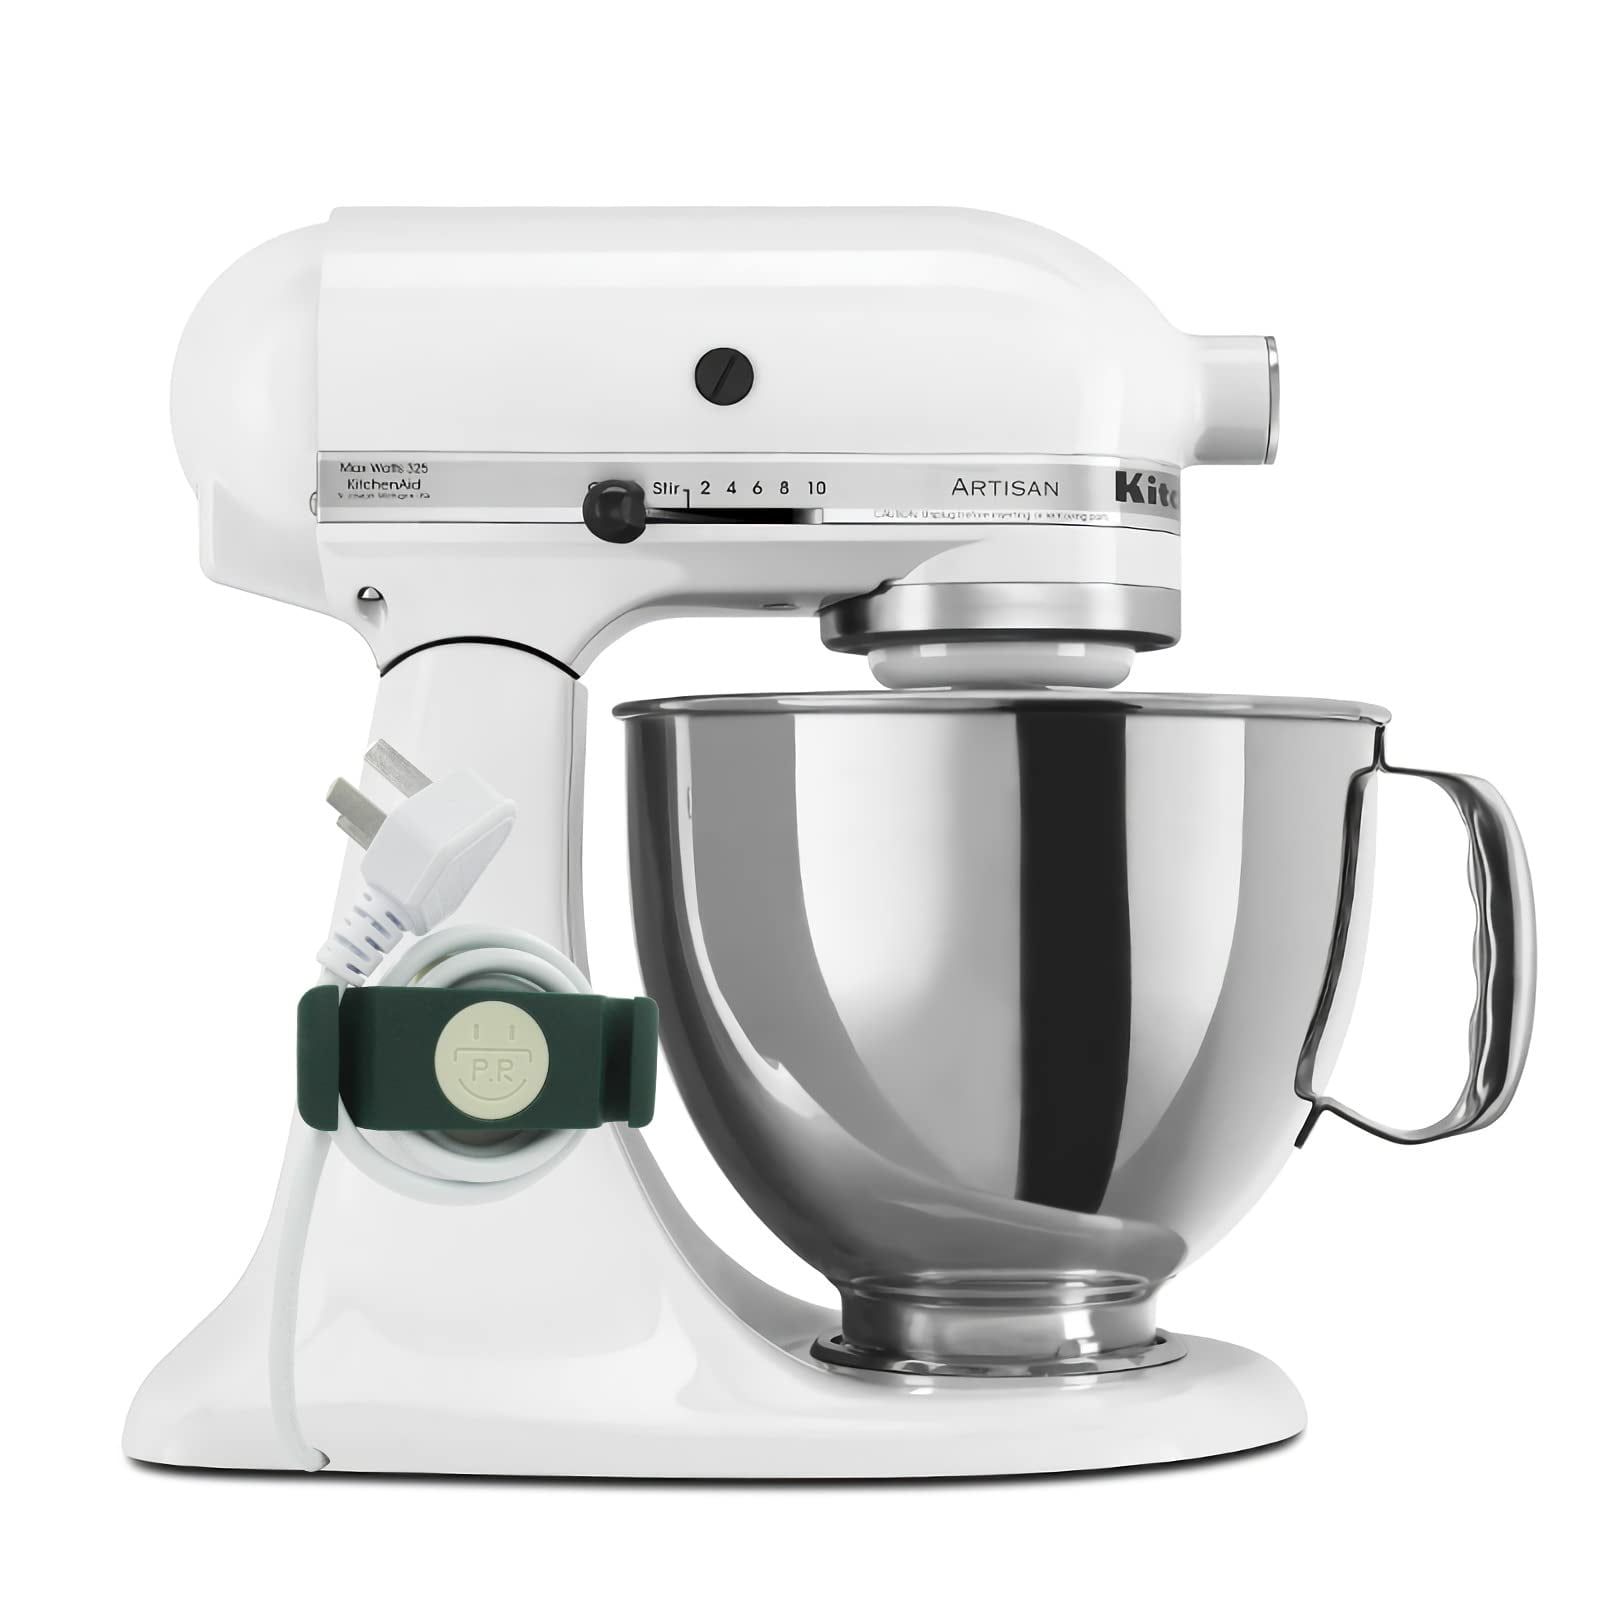 Stand Mixer With A Cord Organizer Stock Photo - Download Image Now